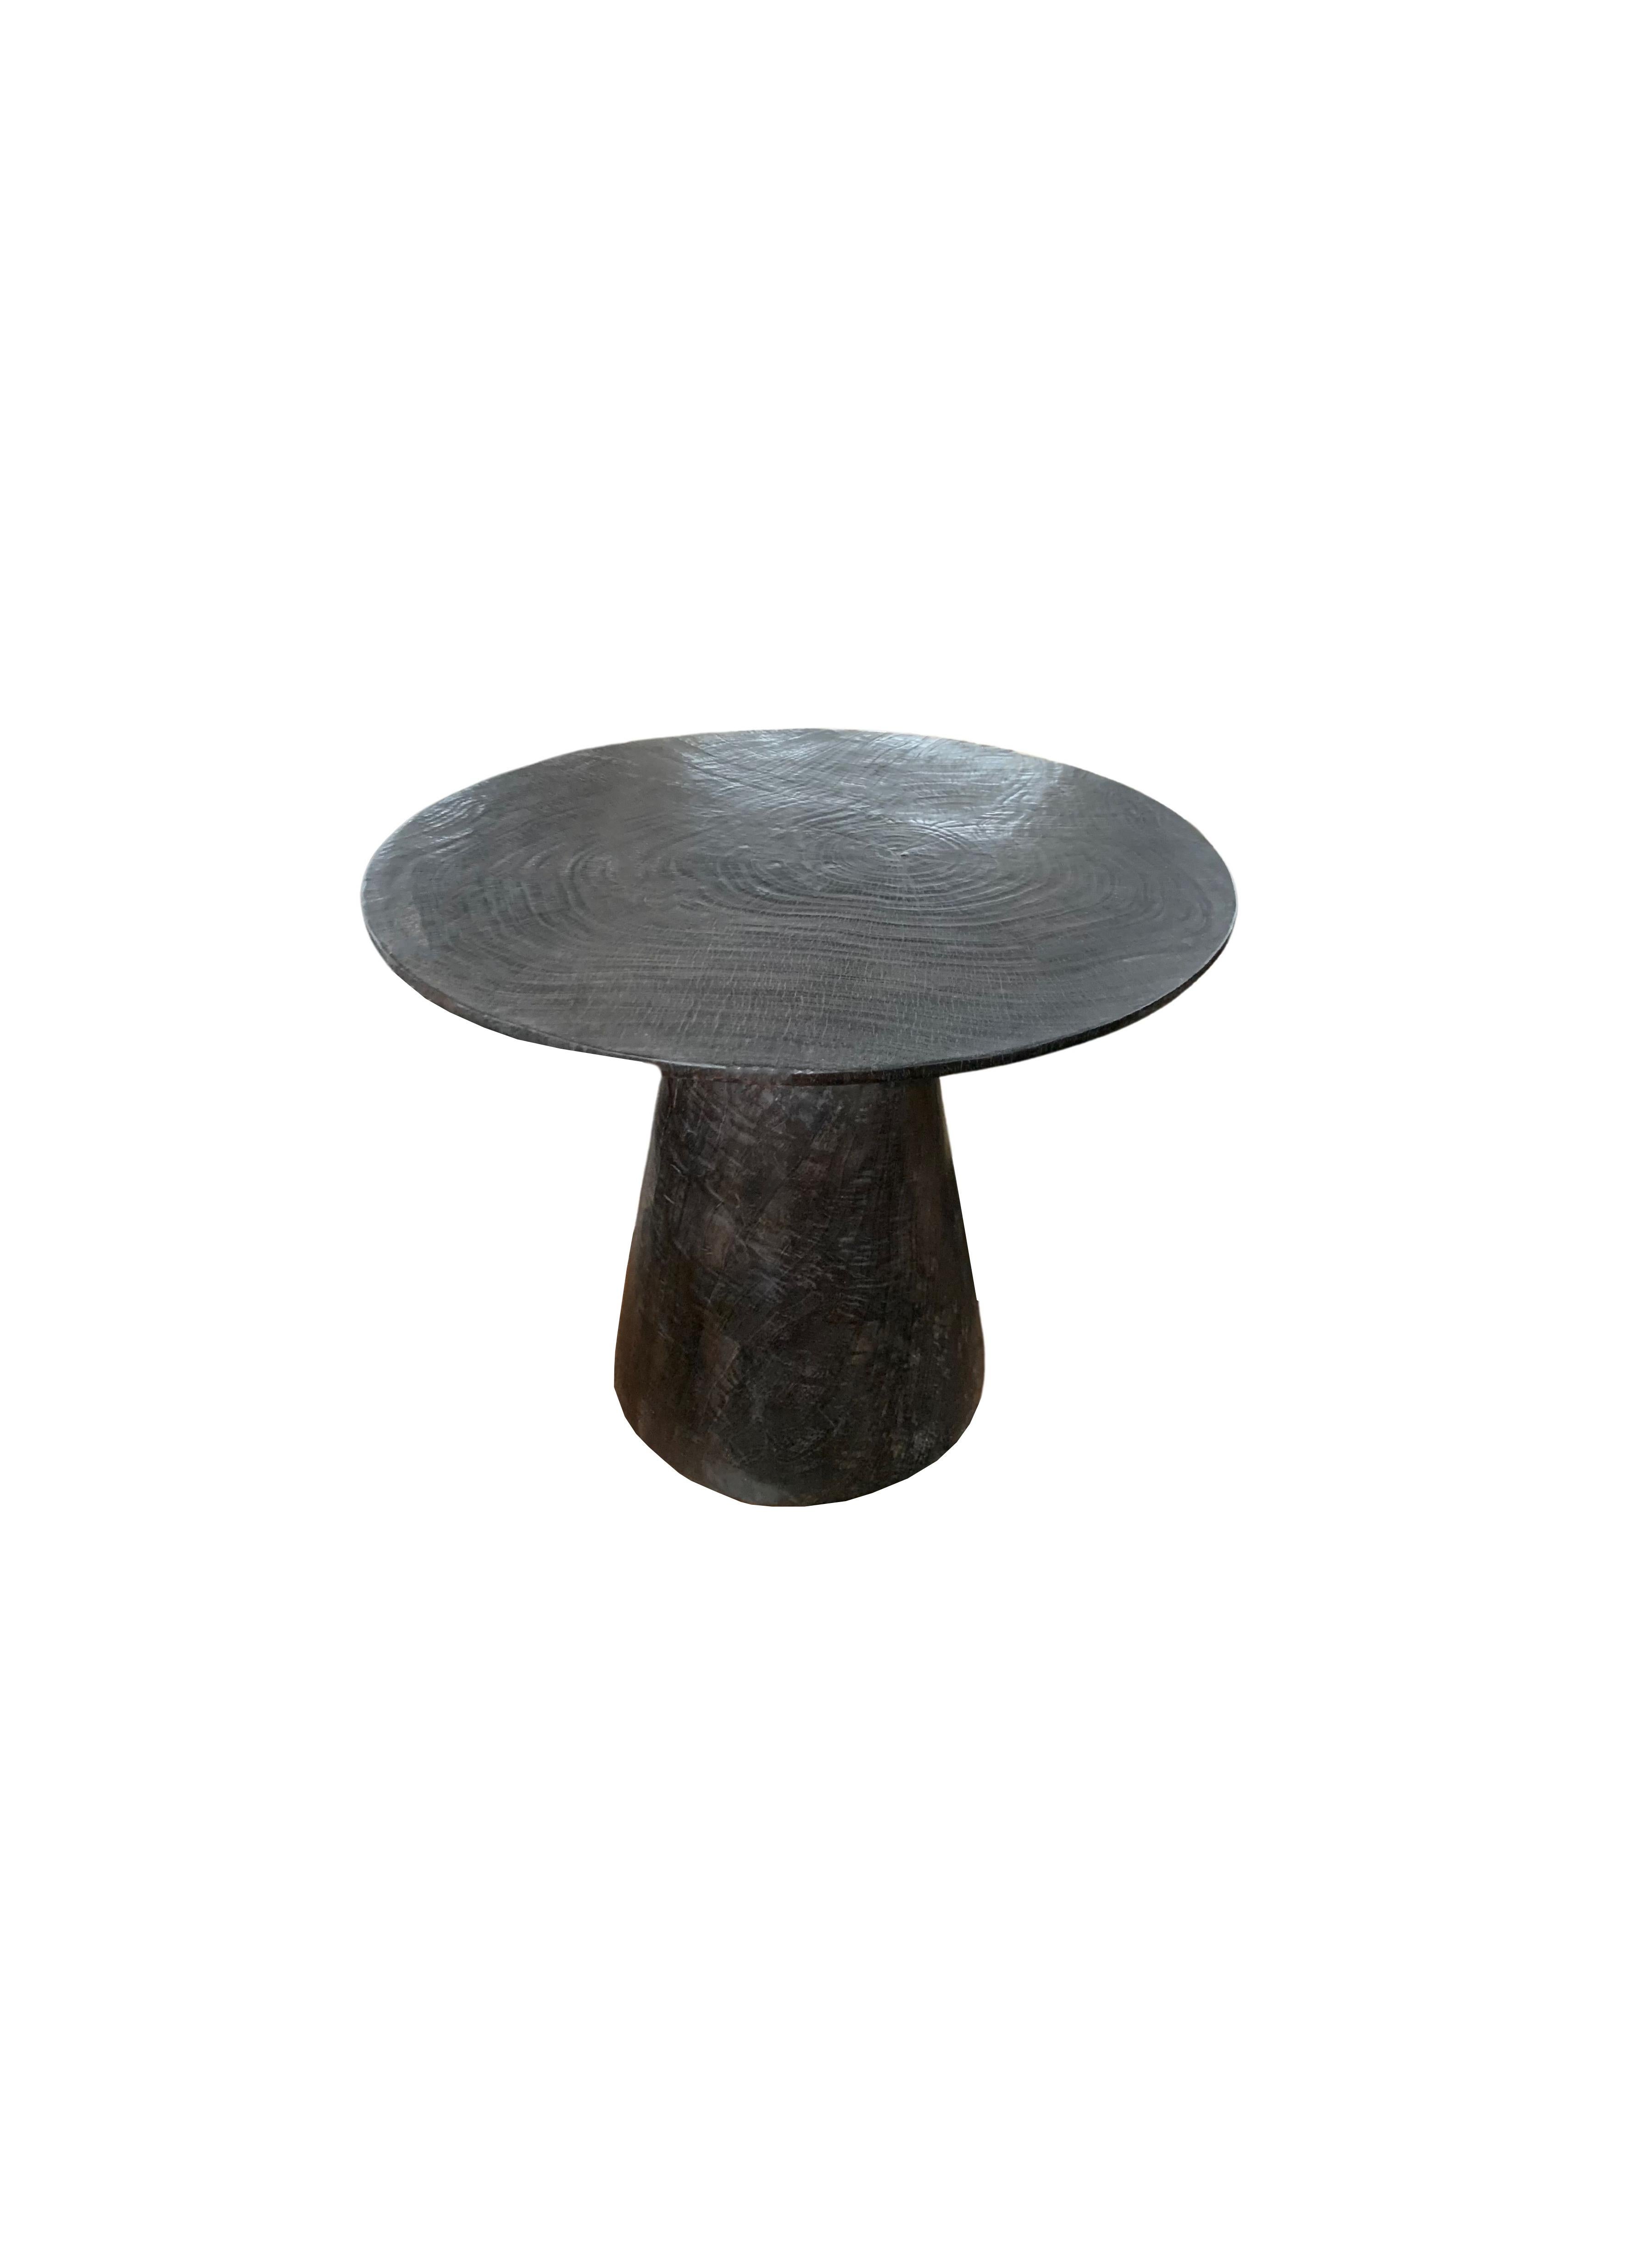 A wonderfully sculptural round side table with a burnt finish. To achieve its dark pigment the wood was burnt numerous times, sanded down and finished with a clear coat. Its neutral pigment and wood texture makes it perfect for any space. It